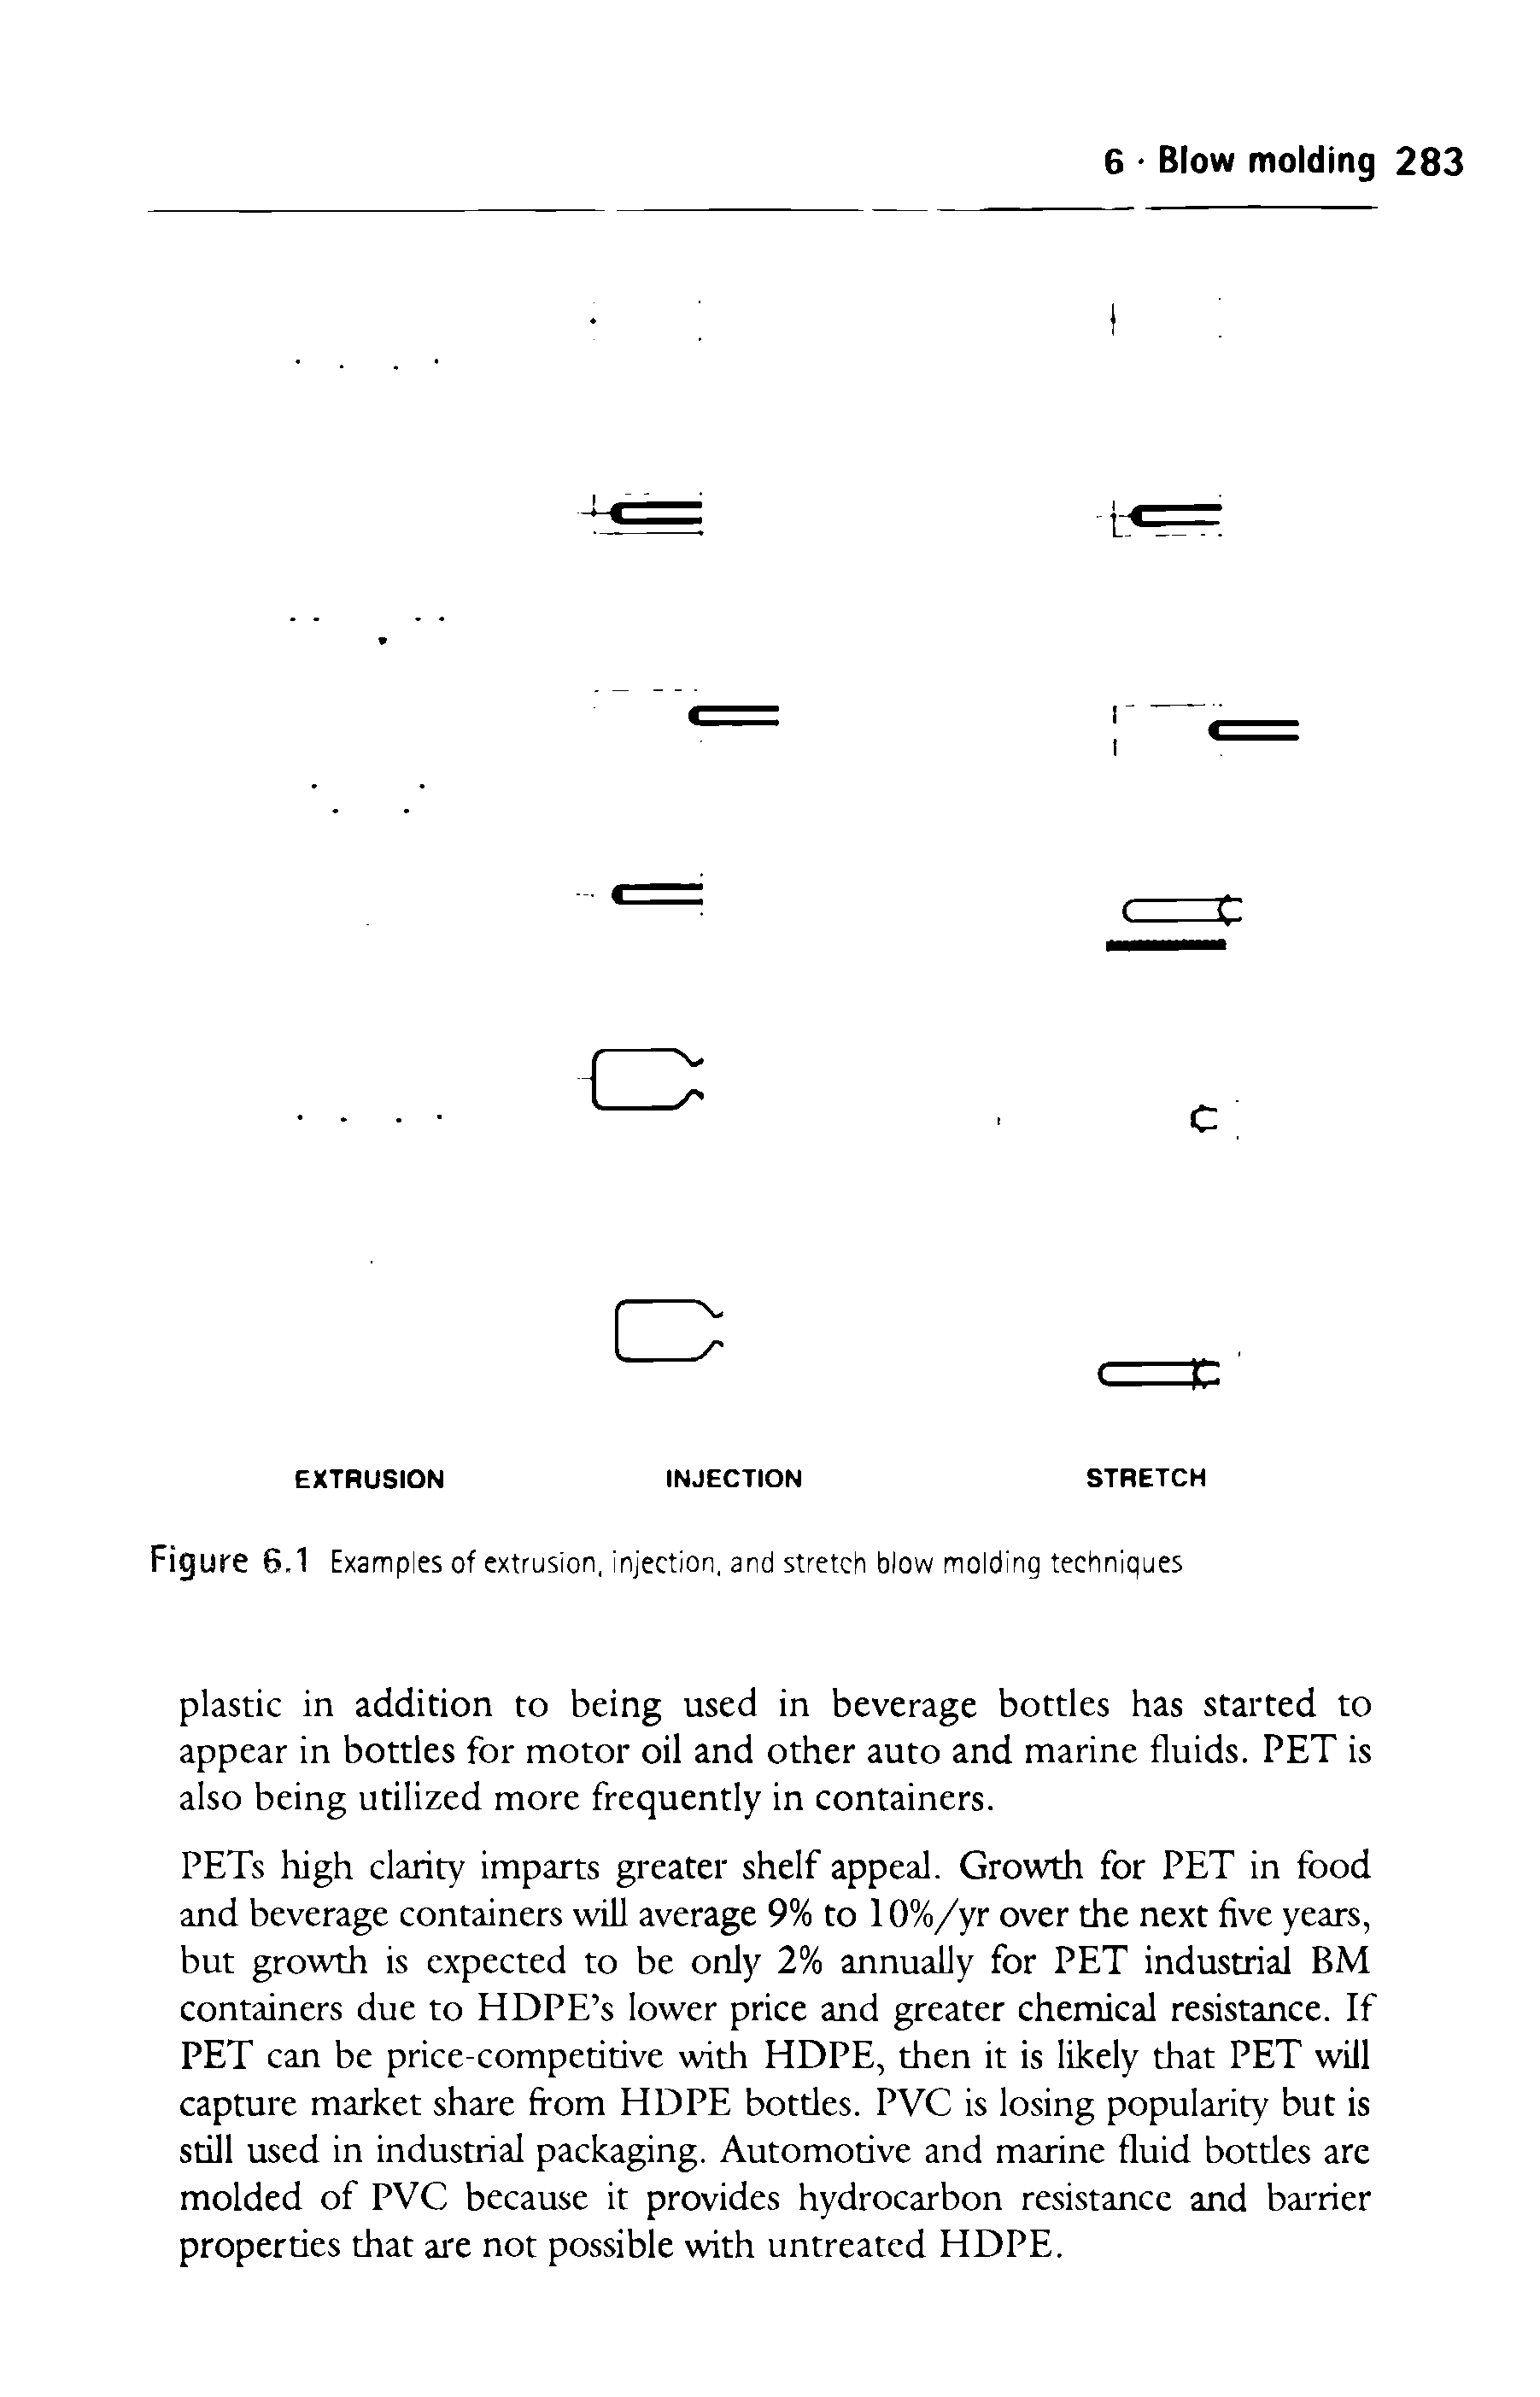 Figure 6.1 Examples of extrusion, injection, and stretch blow molding techniques...